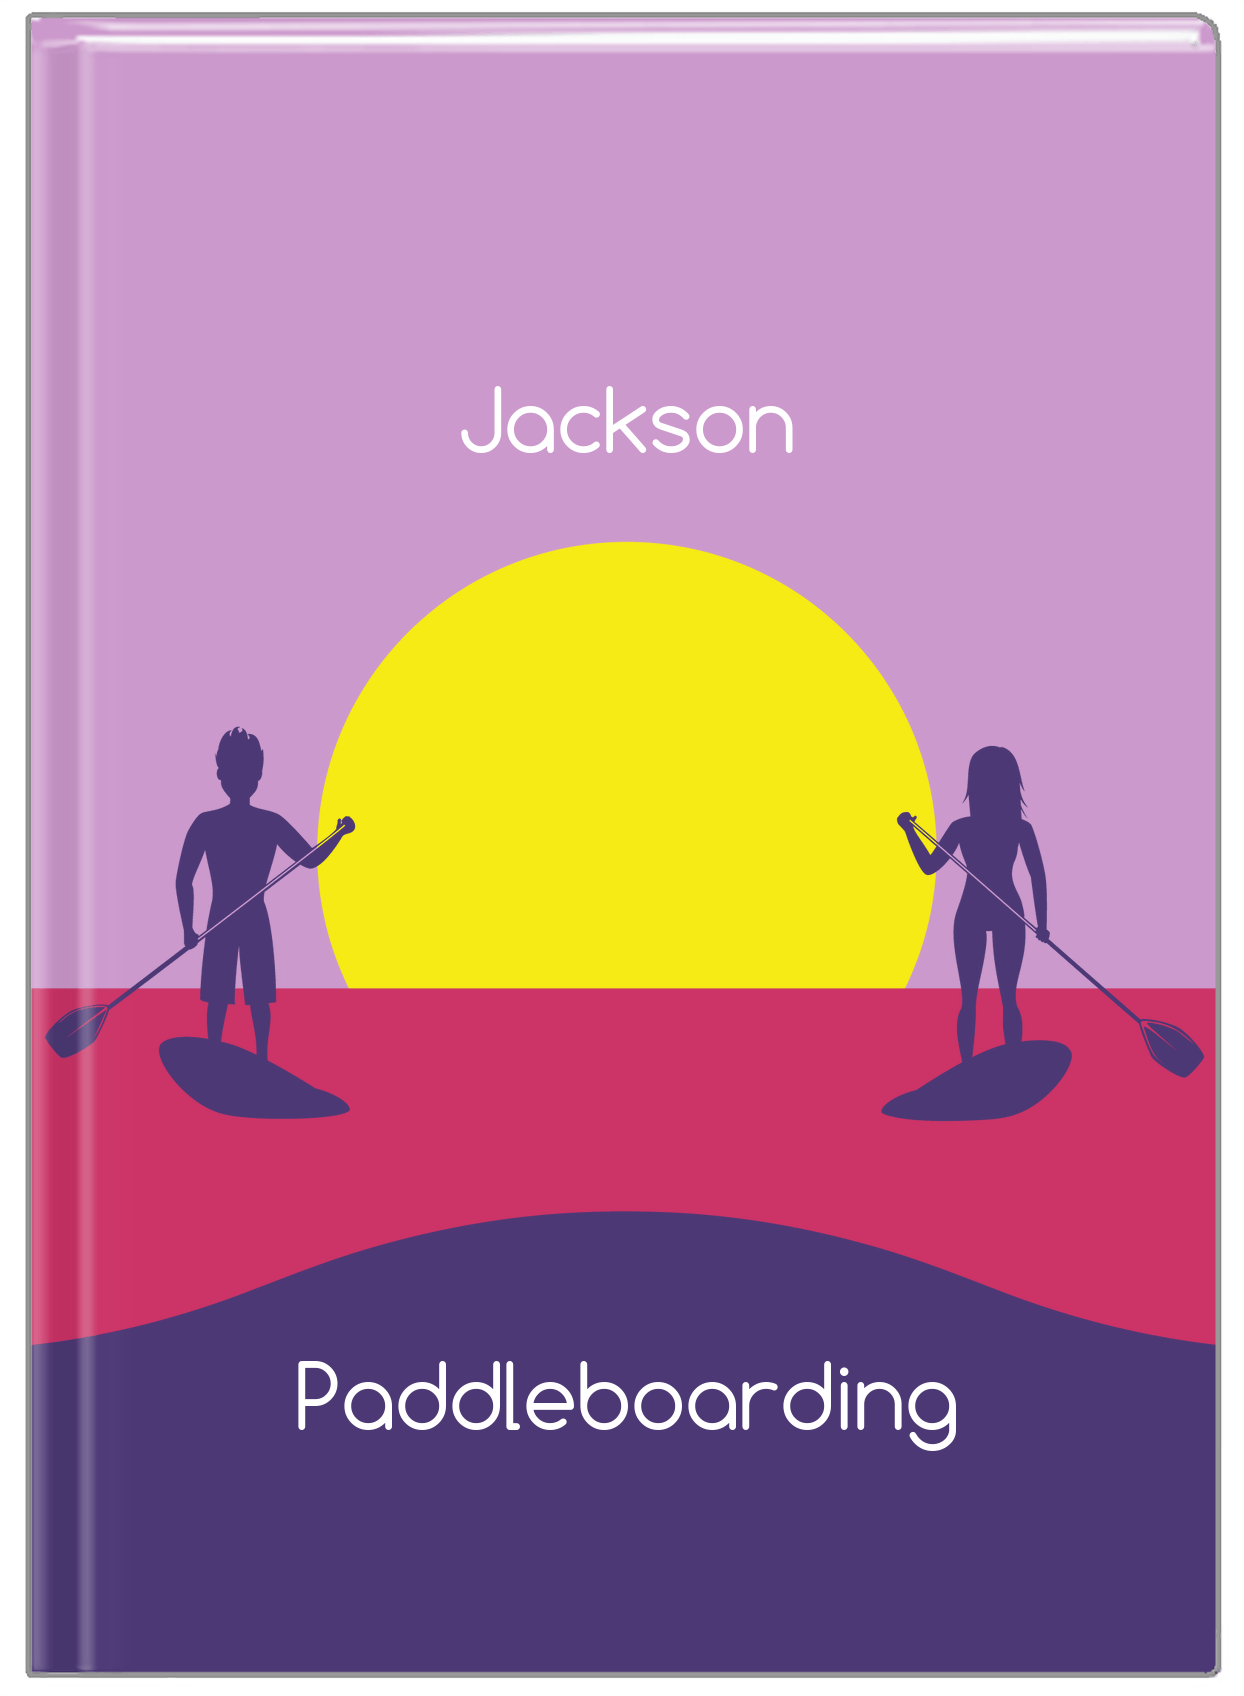 Personalized Beach Journal XI - Paddleboarding - Purple Background - Front View